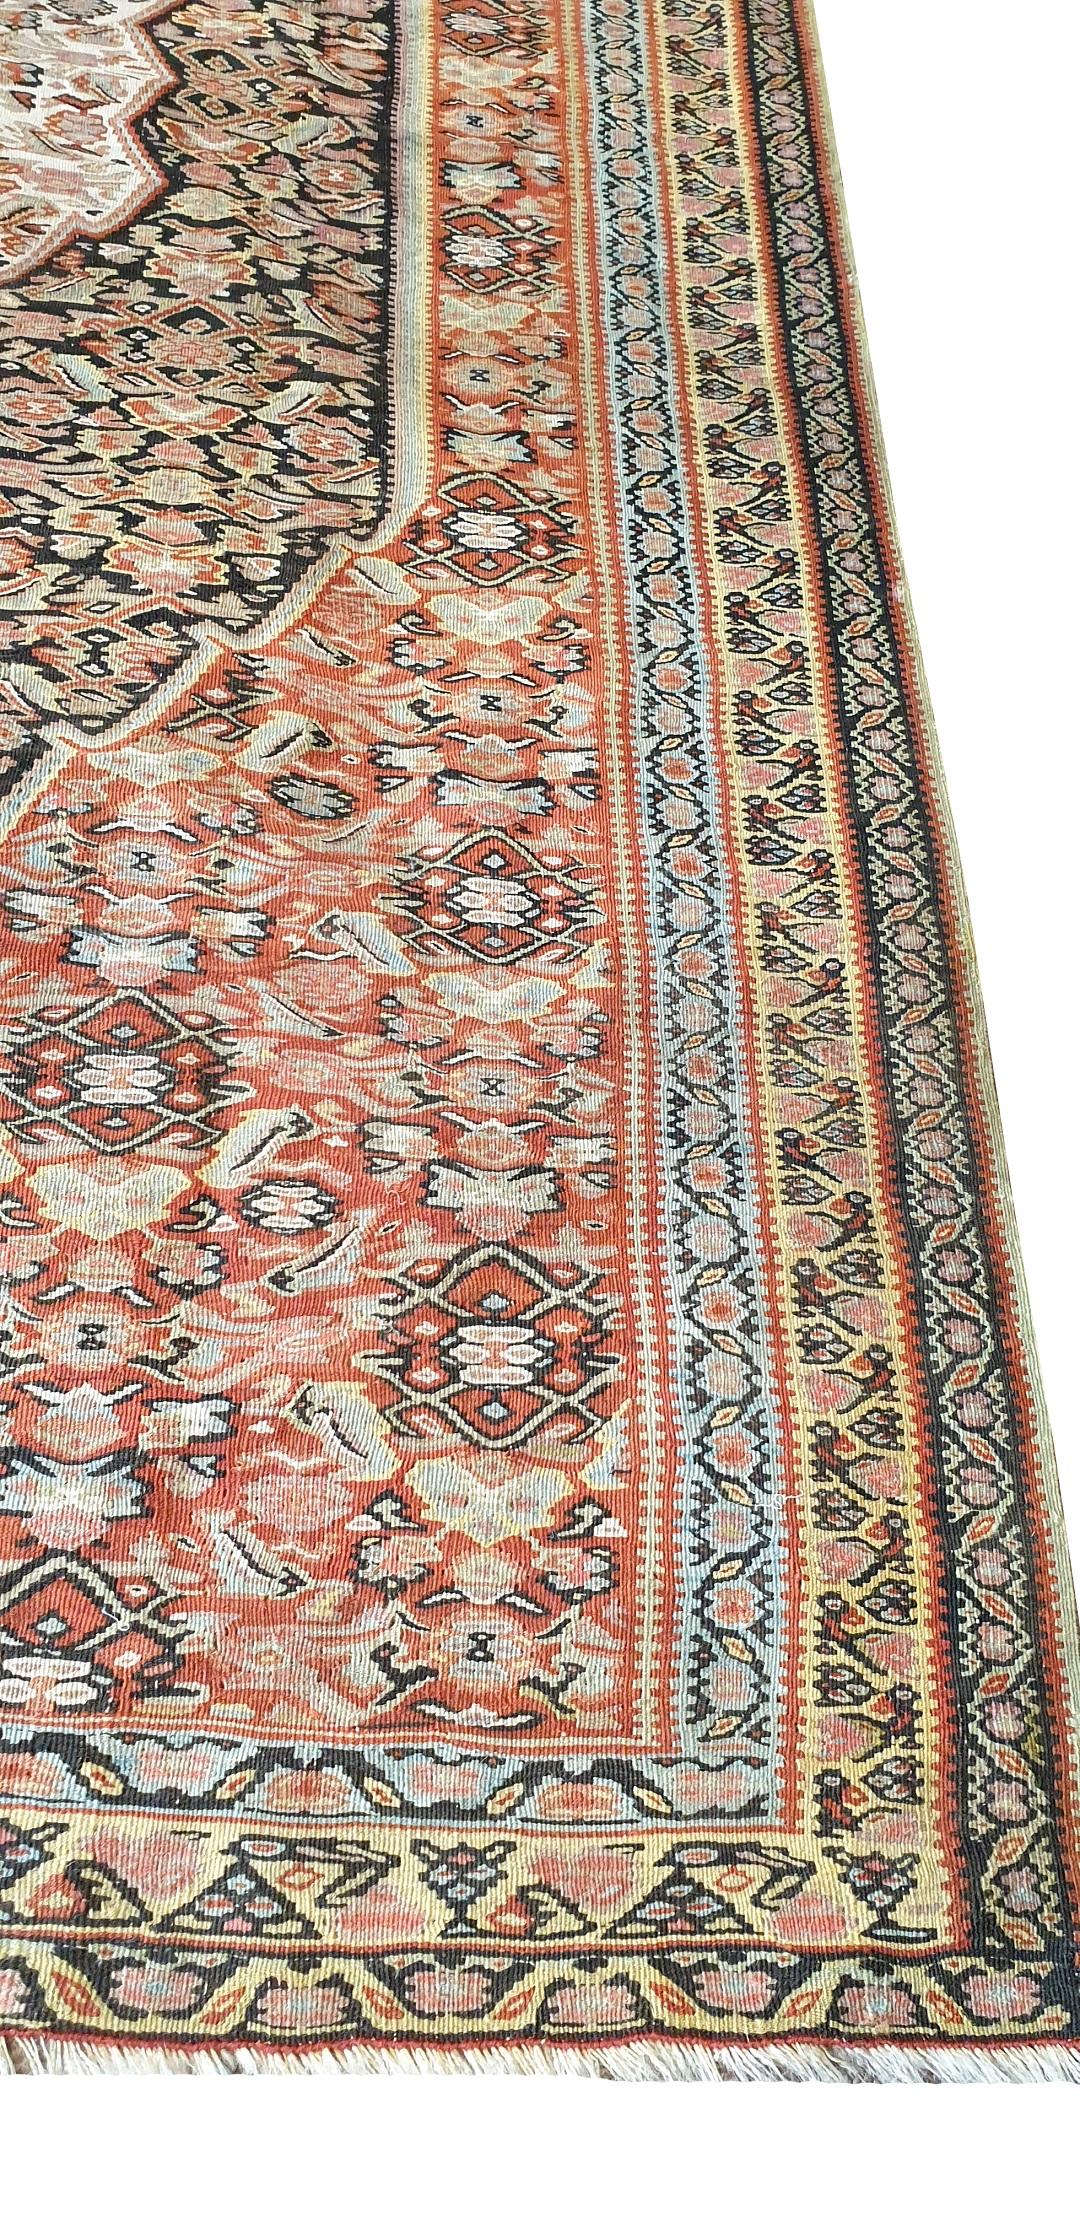 Hand-Woven 663 - Old Fine Senneh Kilim For Sale